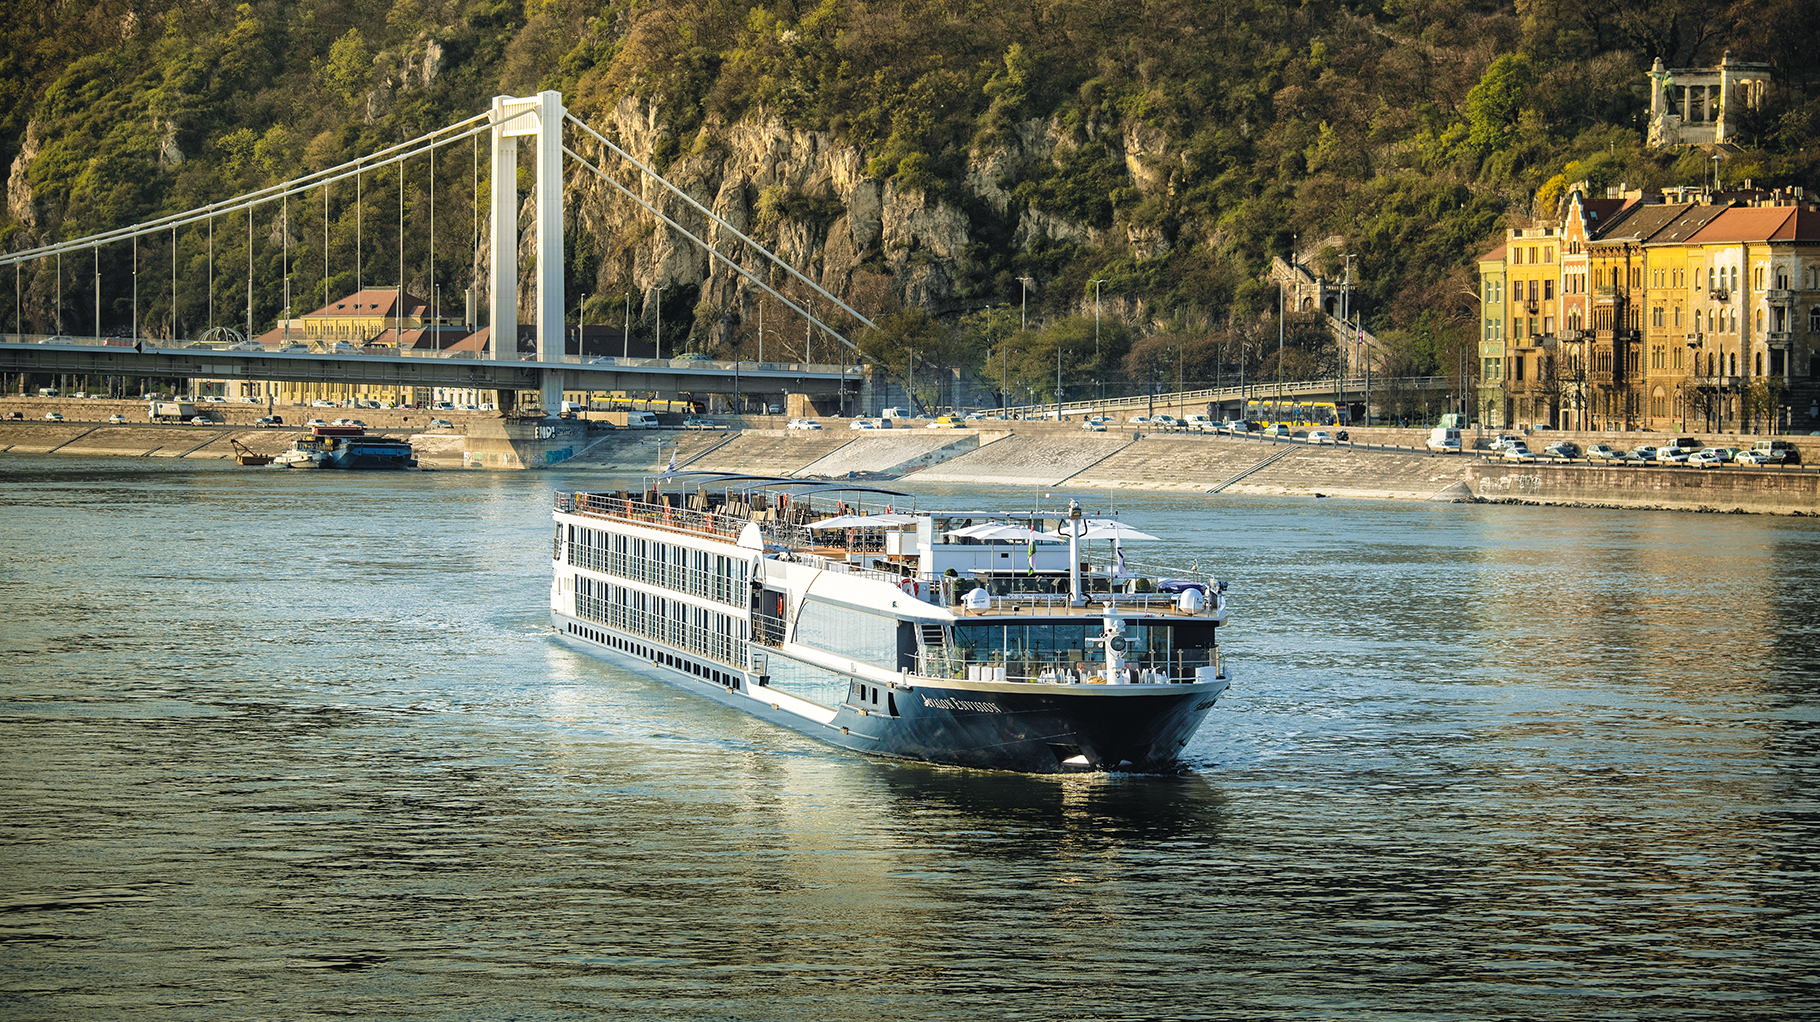 Guests can explore hundreds of ports and small towns on a river ship